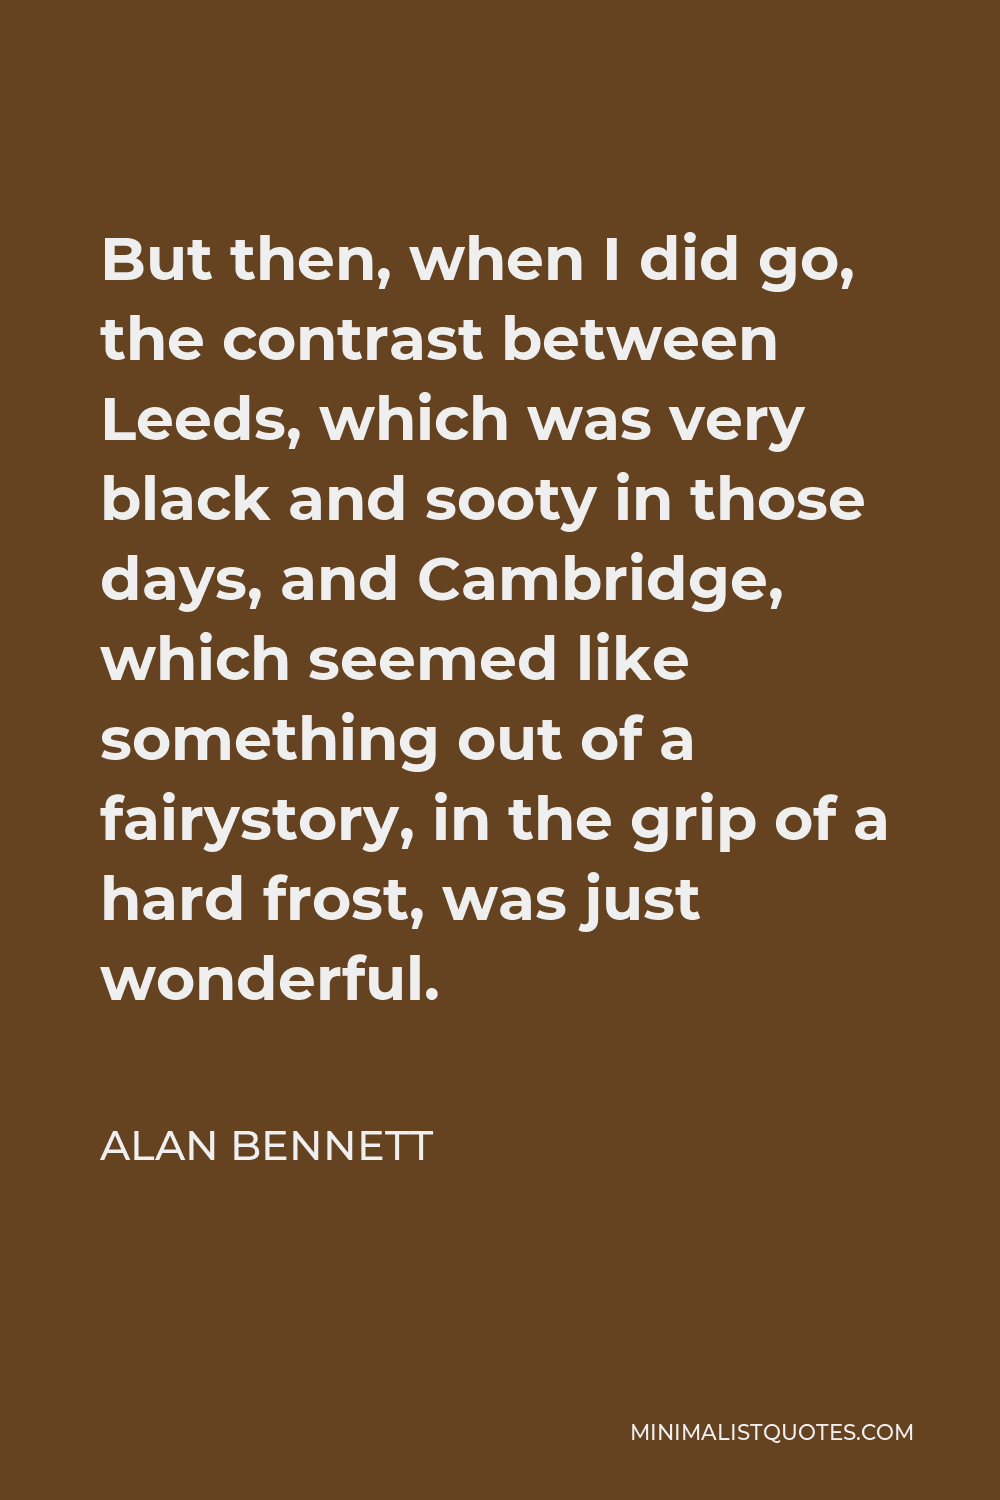 Alan Bennett Quote - But then, when I did go, the contrast between Leeds, which was very black and sooty in those days, and Cambridge, which seemed like something out of a fairystory, in the grip of a hard frost, was just wonderful.